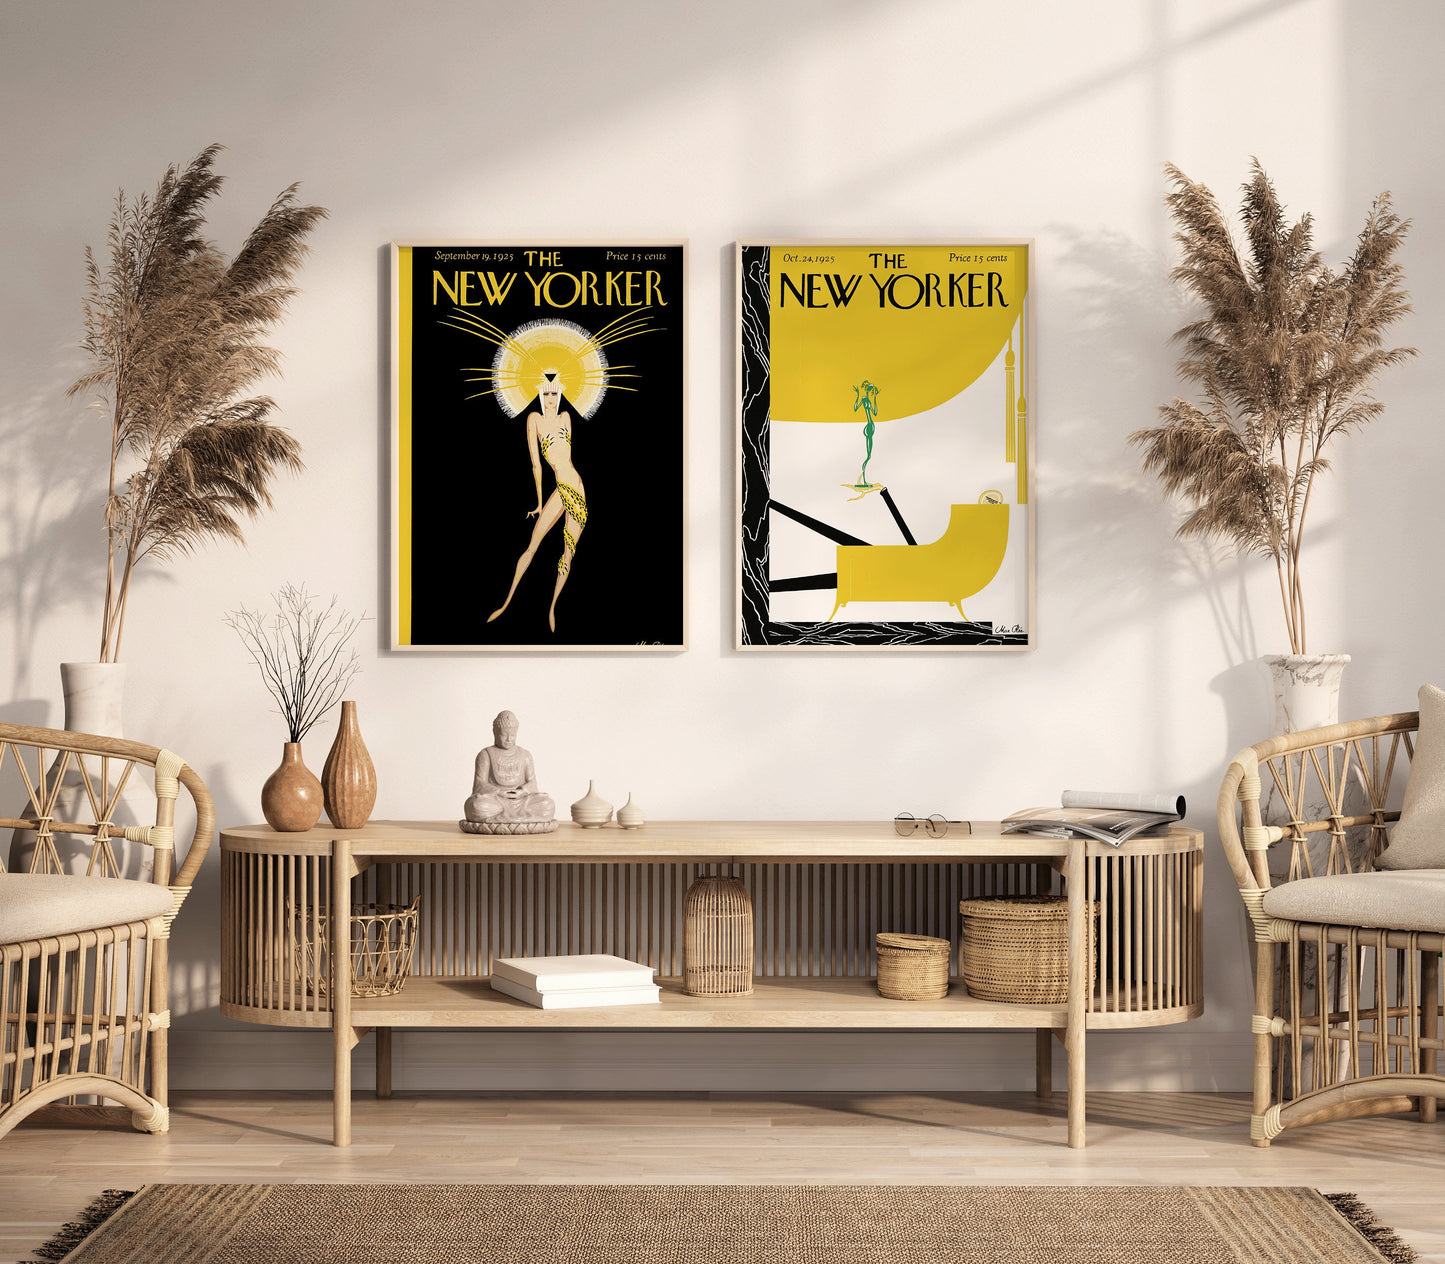 Set of 2 New Yorker Magazine Cover Print Black Gold Retro Vintage Style Aesthetic Art Print Home Office Decor Ready to hang Framed Gift